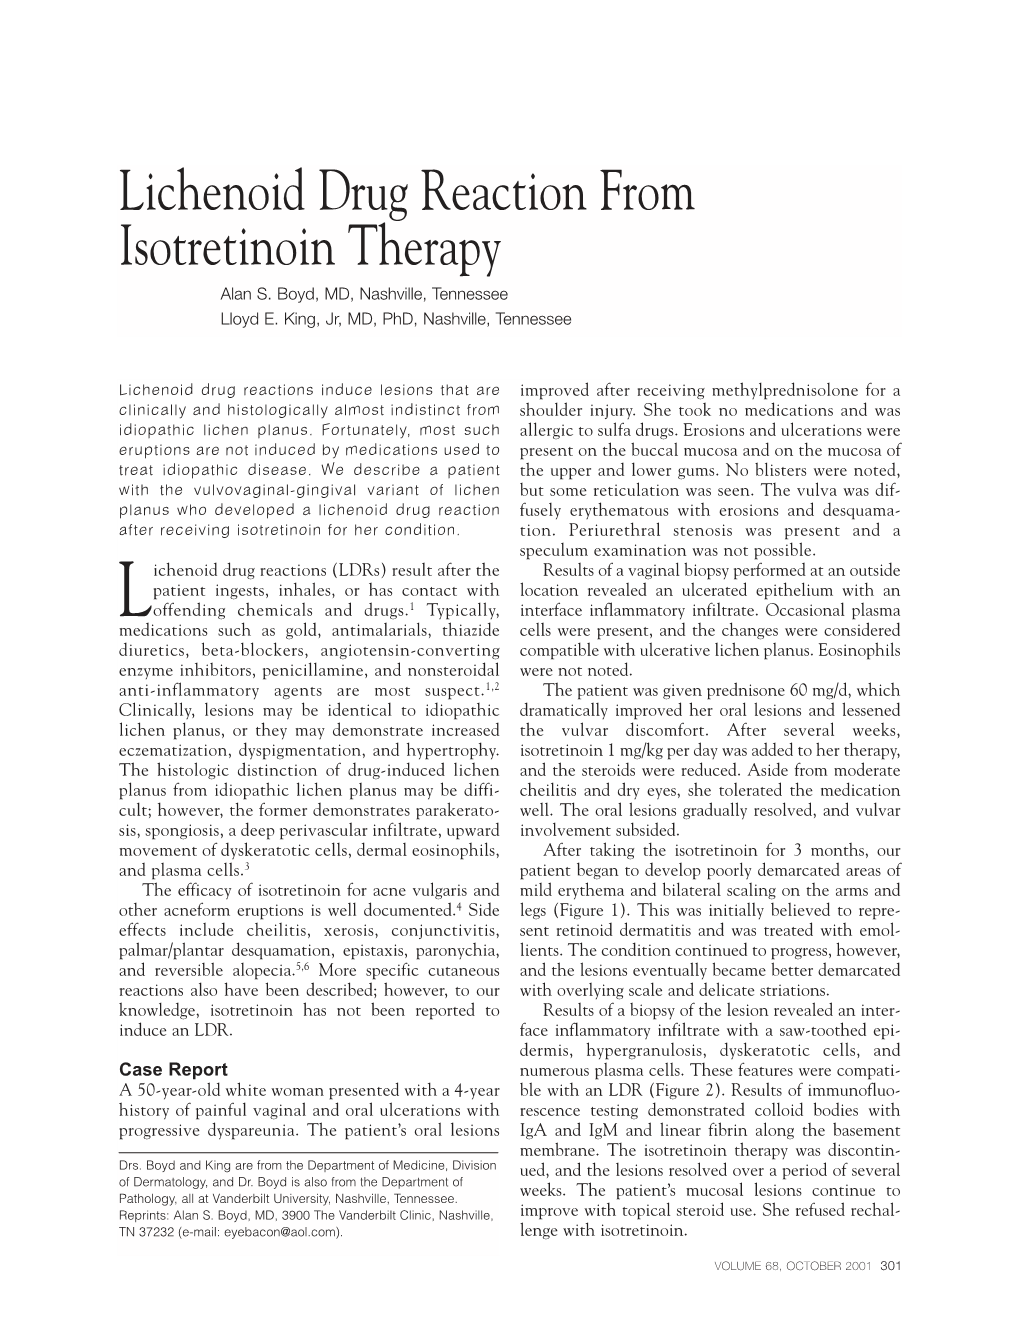 Lichenoid Drug Reaction from Isotretinoin Therapy Alan S